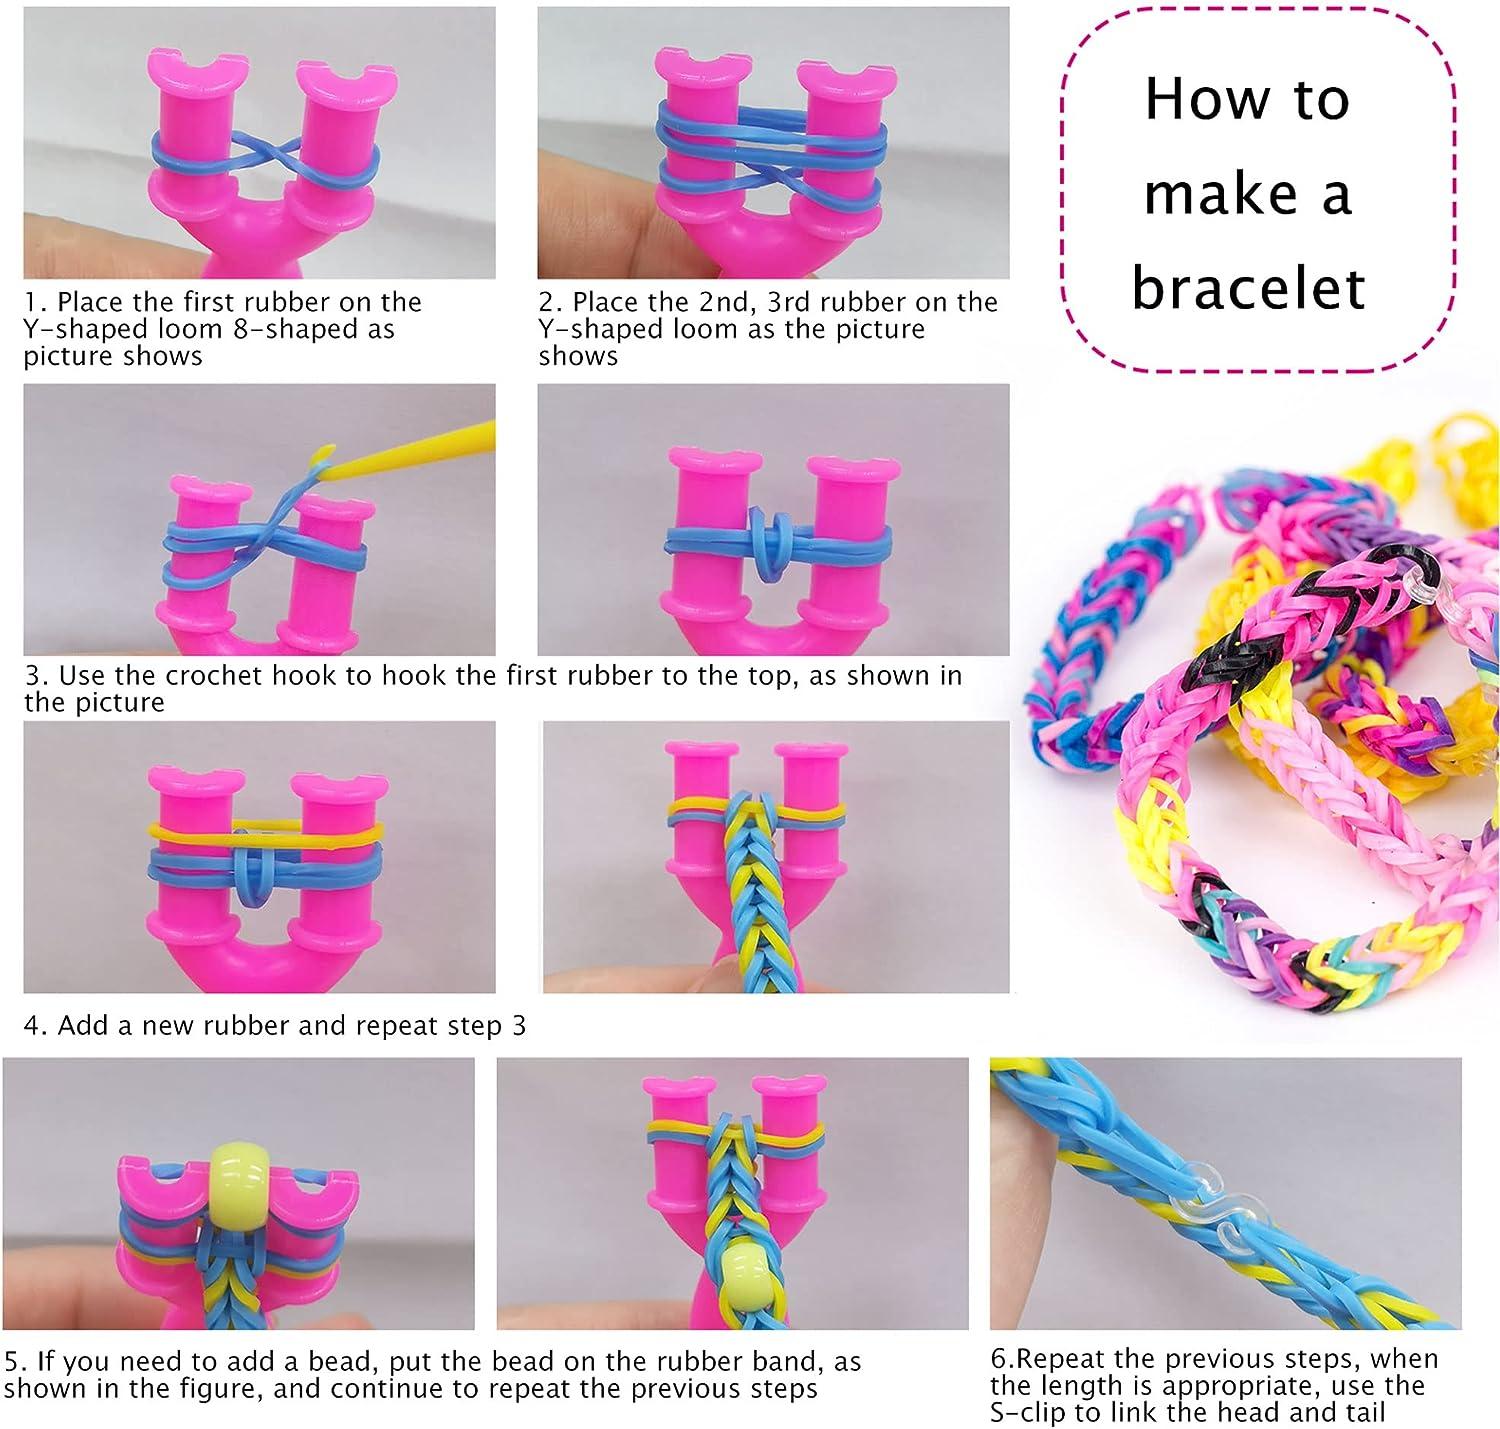  VENSEEN Rainbow Rubber Bands Bracelet Making Kit, $5.49 WITH CODE  50Y7F71C